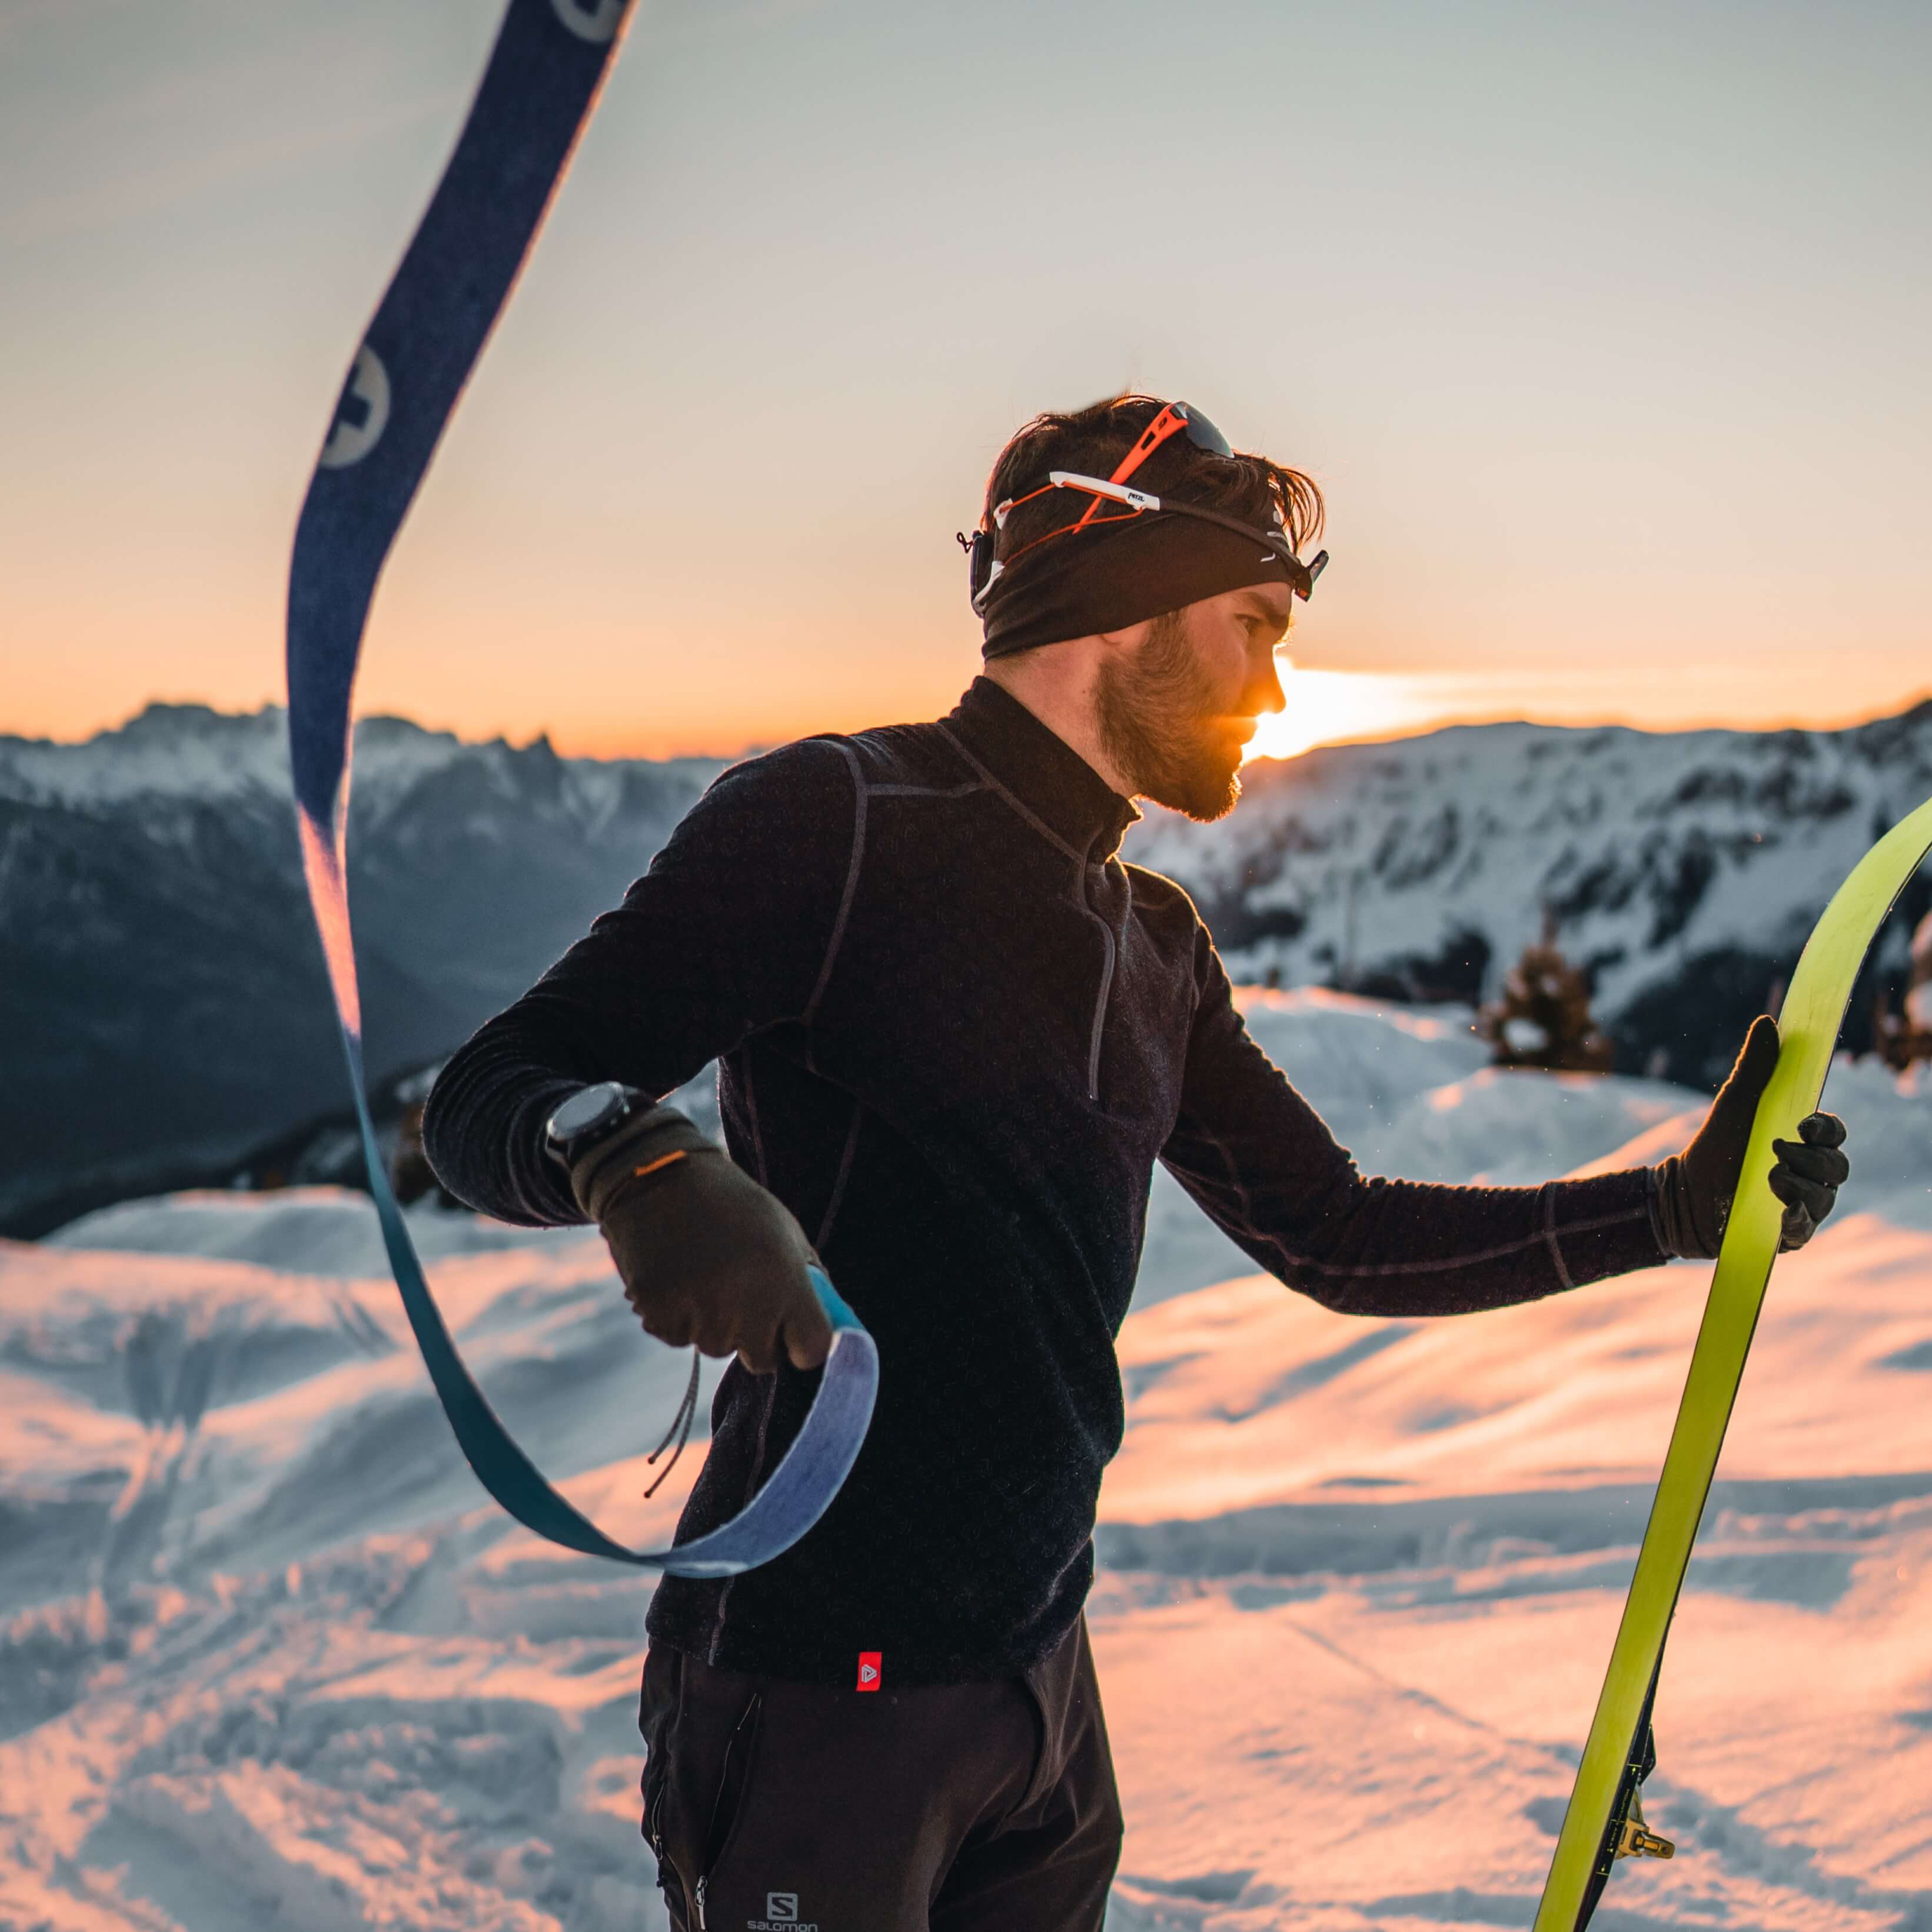 a-skier-on-top-of-the-mountain-during-sunset